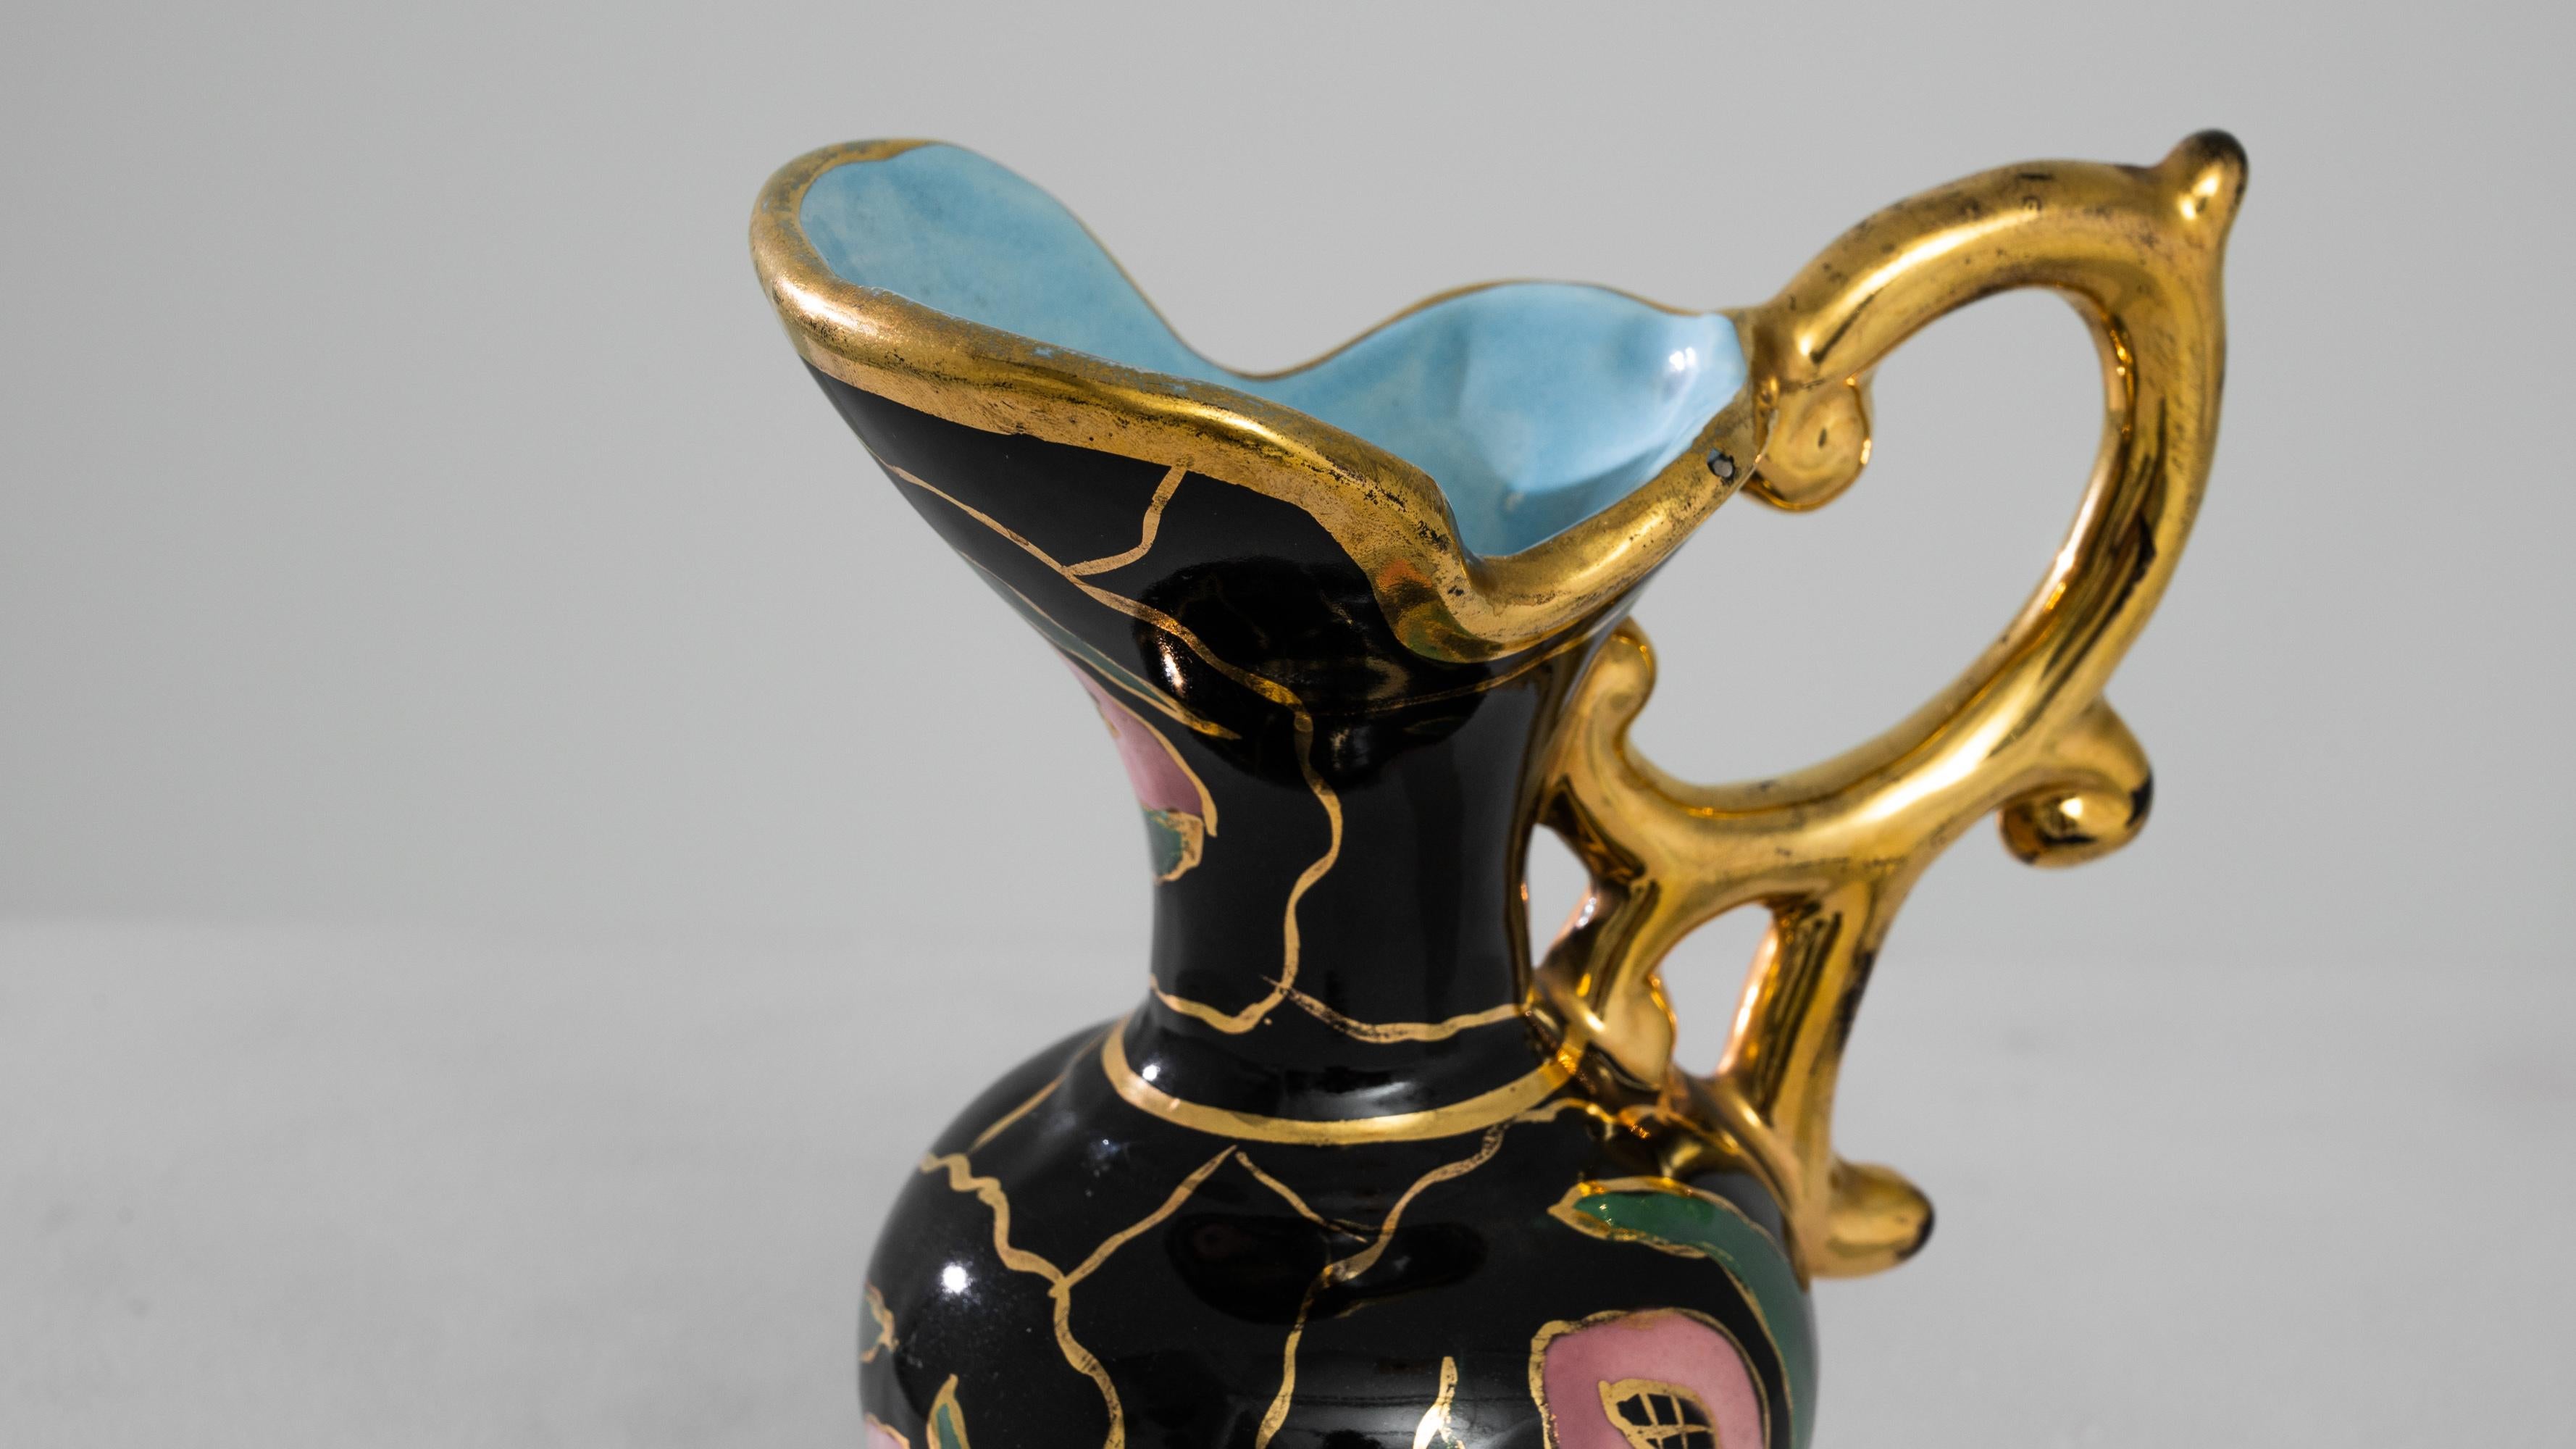 Behold the allure of this 1960s French ceramic jug, a paragon of elegance. Cloaked in a main black hue, it is adorned with delicate splashes of green and pink, reminiscent of blooming flowers. The intricate gold accents bestow a regal touch,